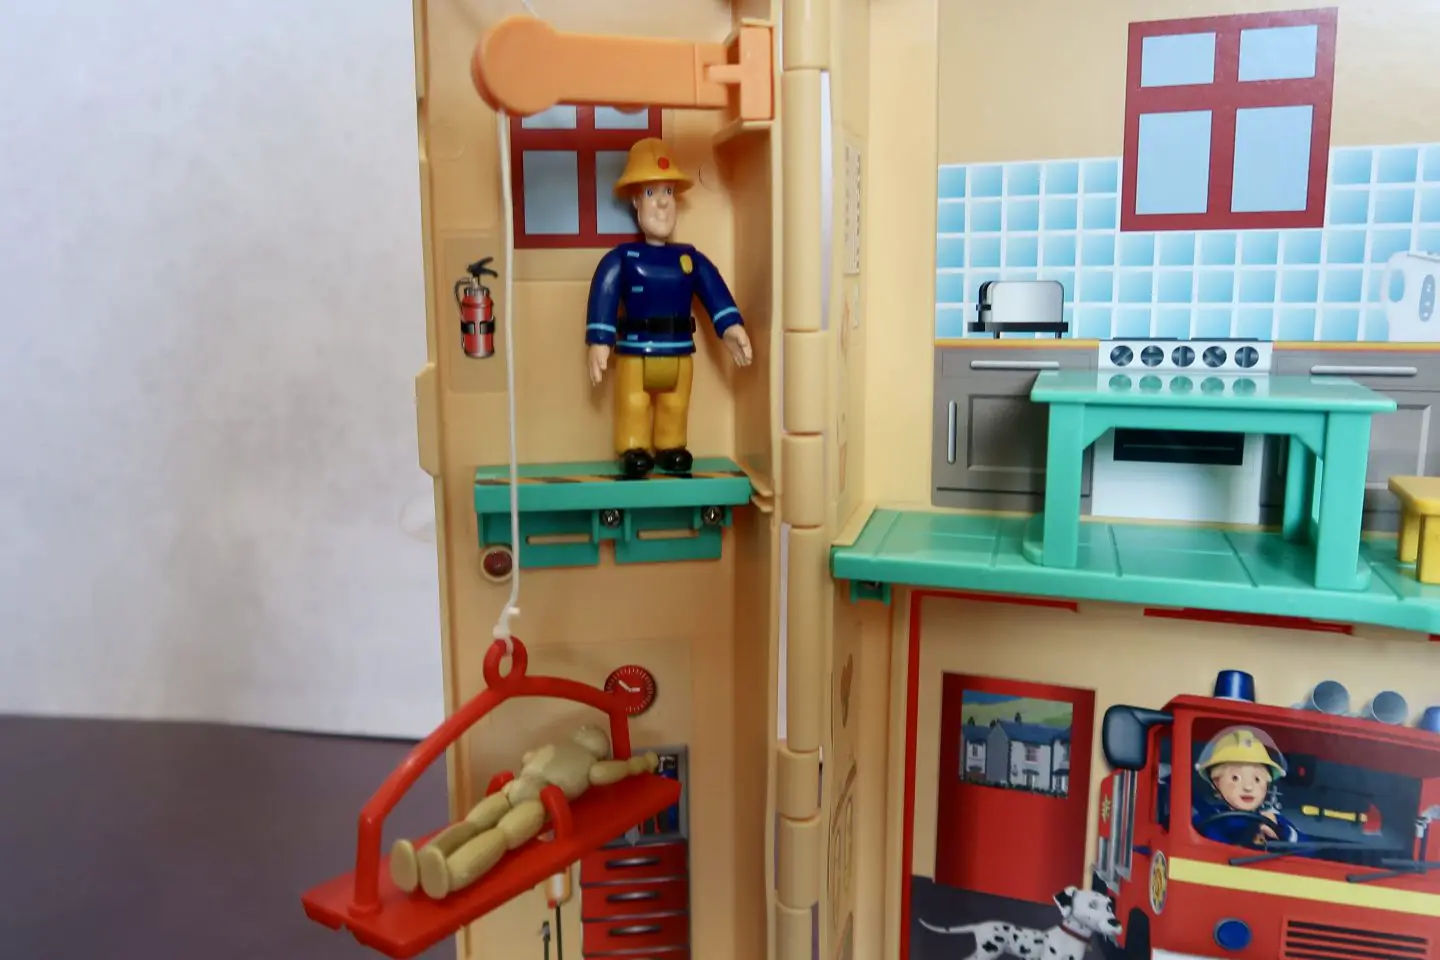 Fireman Sam figure standing on a ledge next to a pulled with a red stretcher and training dummy on it